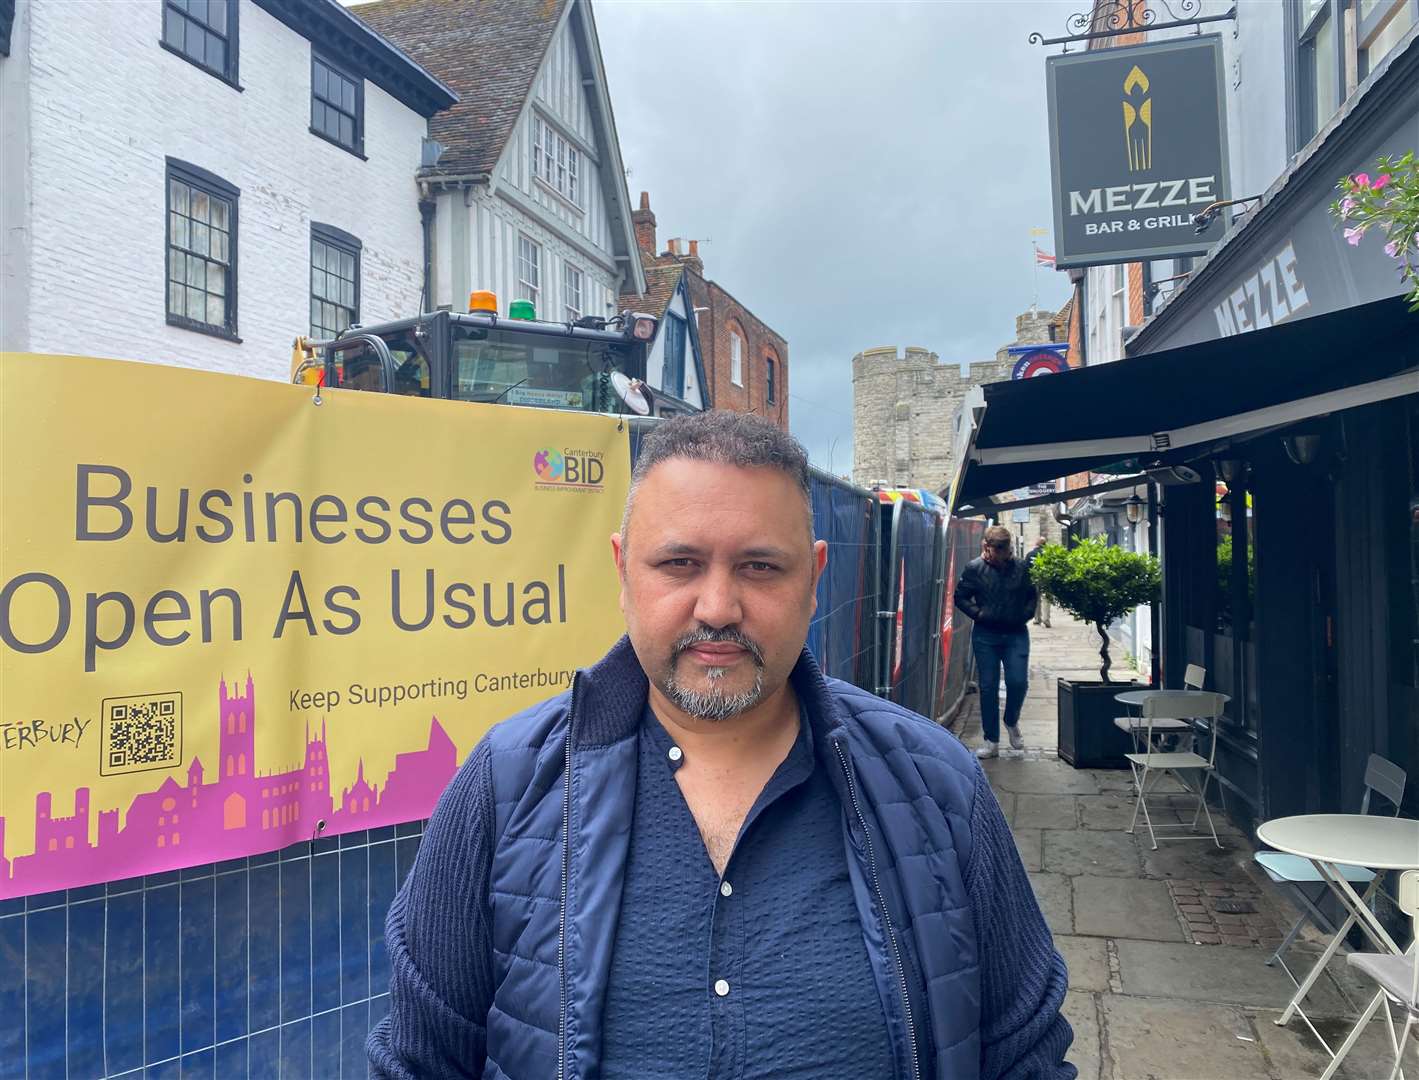 Hakan Ozlu, owner of Mezze Bar and Grill, says the roadworks on St Peter's Street have cut the restaurant's trade by 70%